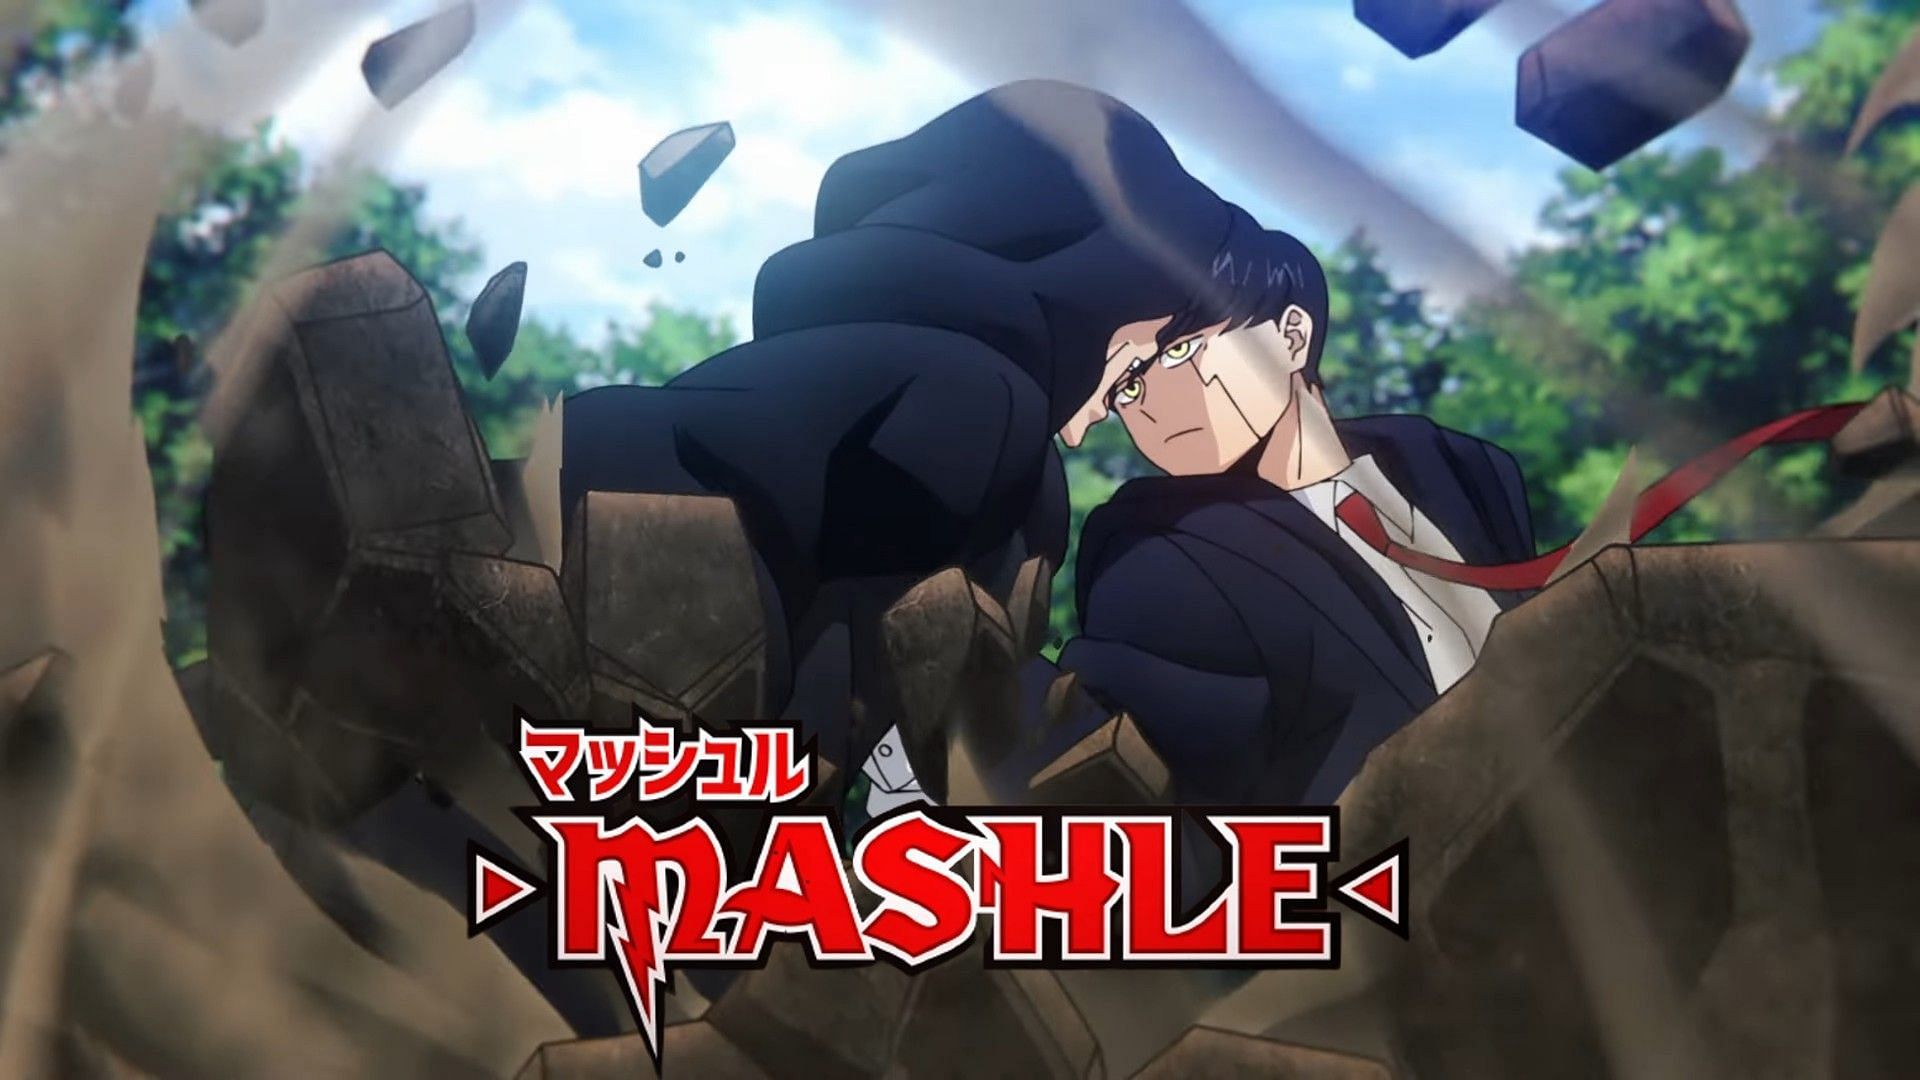 Mashle: Magic And Muscles Anime Release Date Confirmed